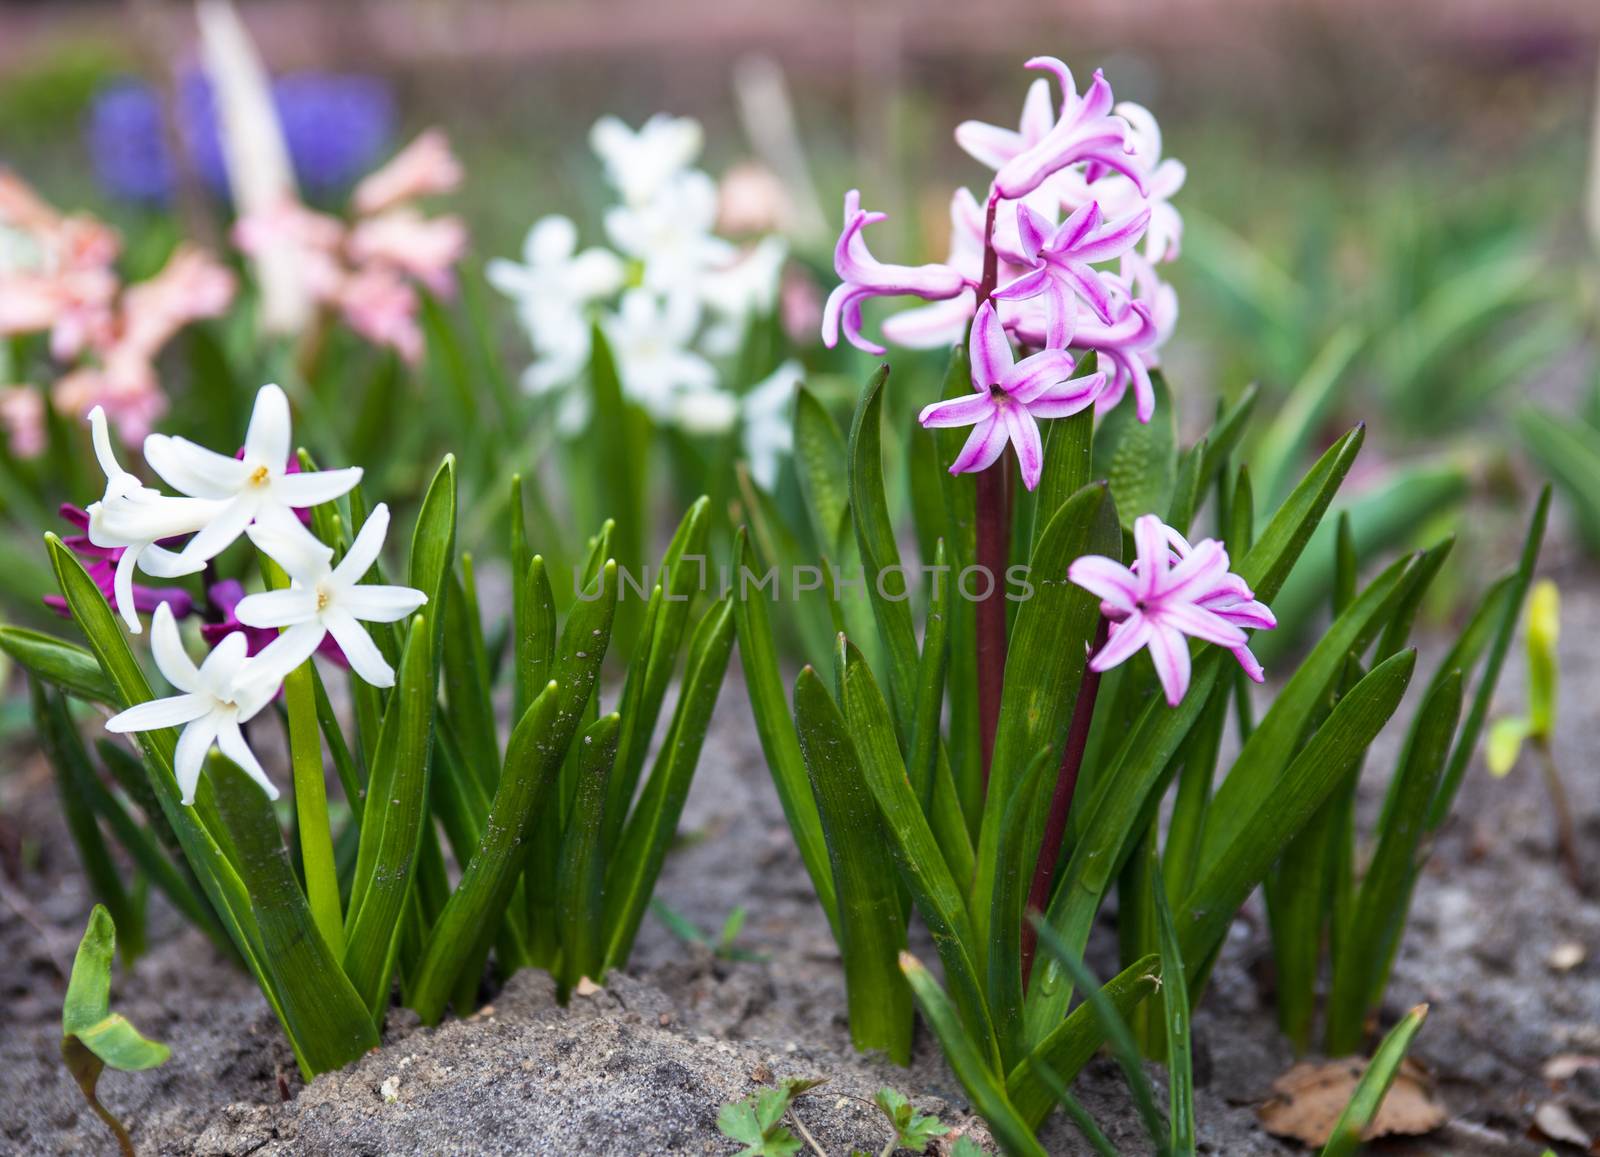 Romantic and delicate spring flowers Hyacinth in bloom